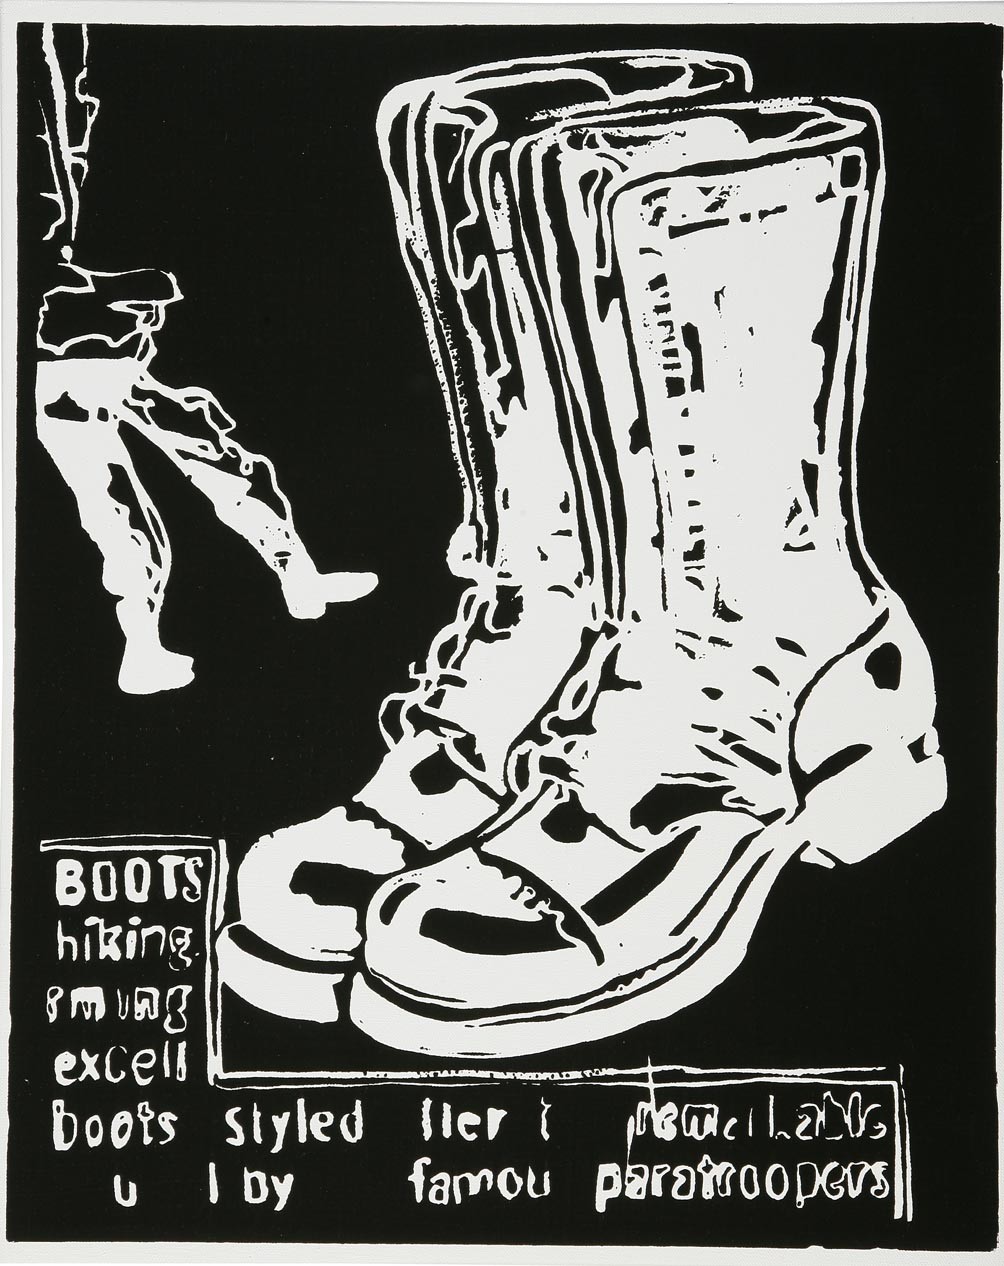 Andy Warhol | Paratrooper Boots | Negative | 1985-86 | Image of Artists' work.